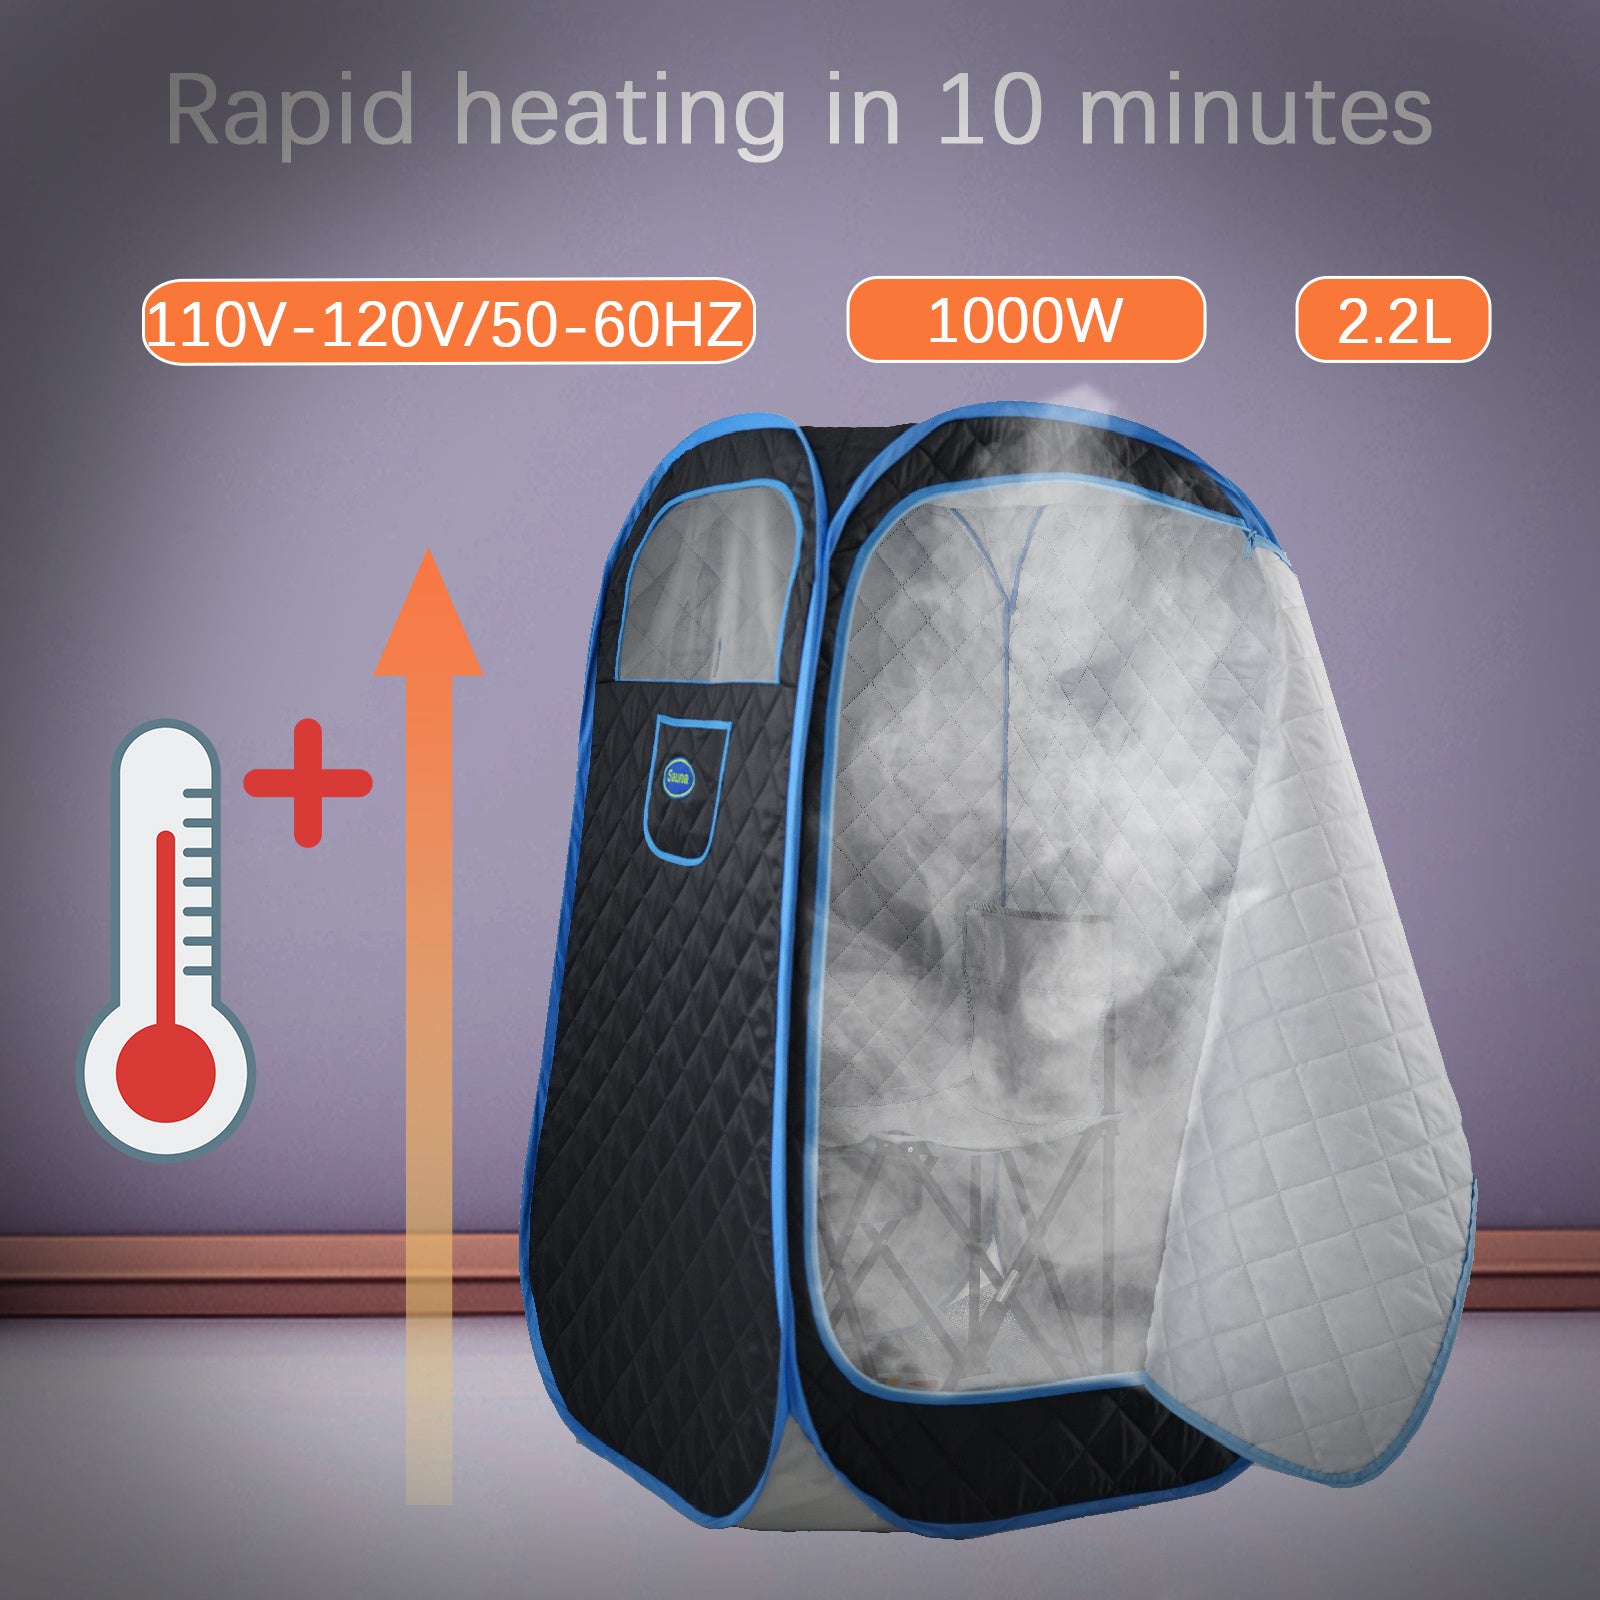 Image showing the features of the Portable Folding Full size Steam Sauna with 1000W&2.2L steam Generator.